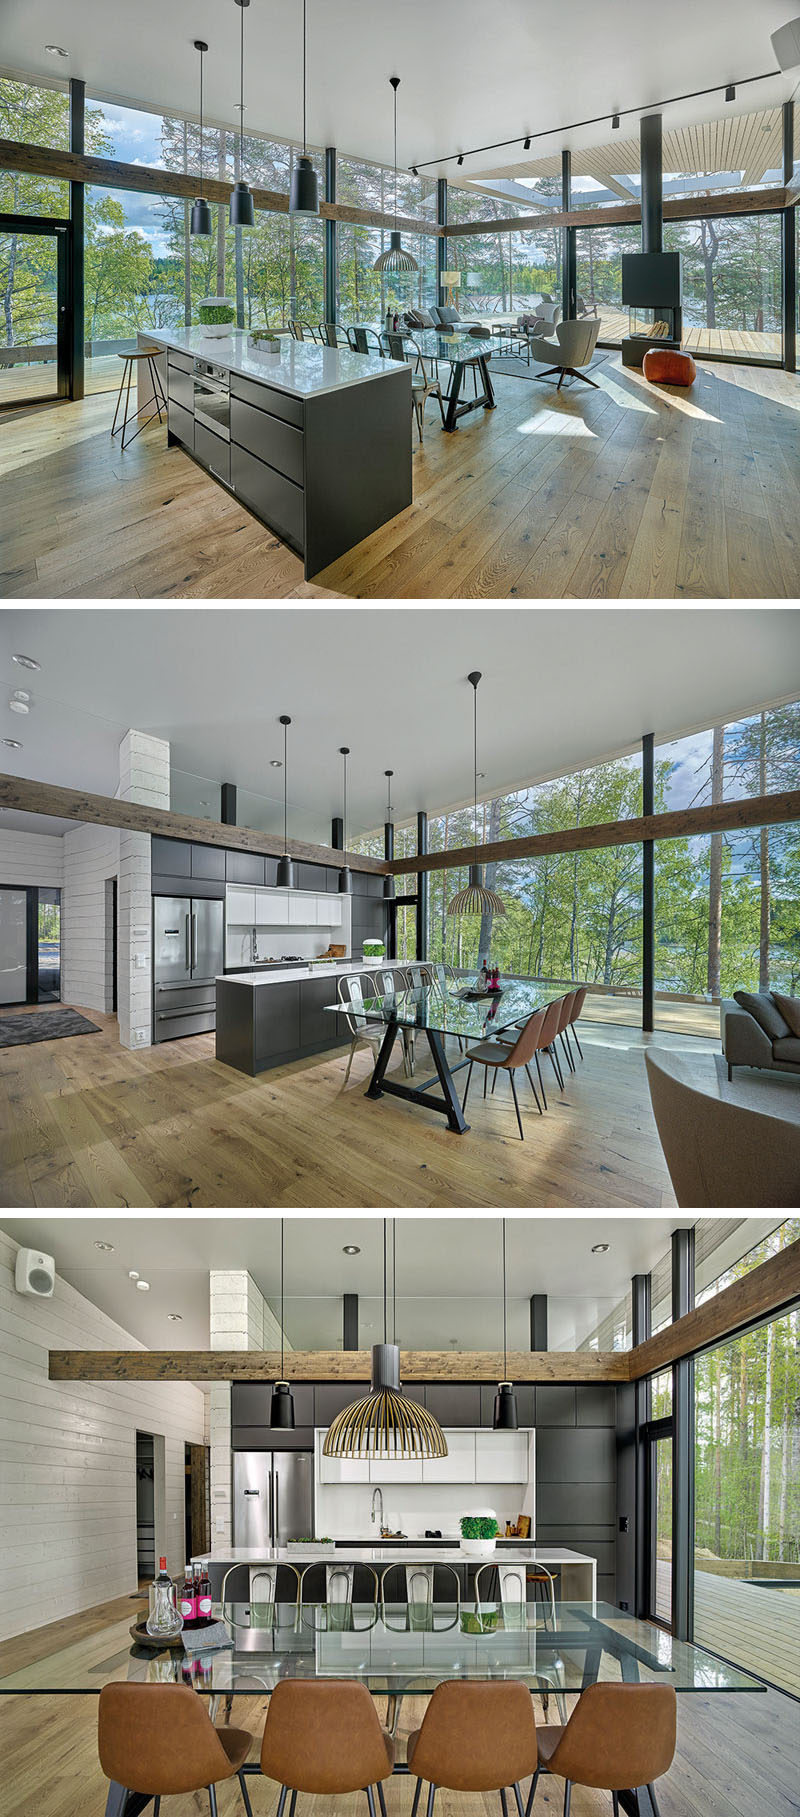 modern-kitchen-and-dining-area-open-plan-050418-151-05-800x1817